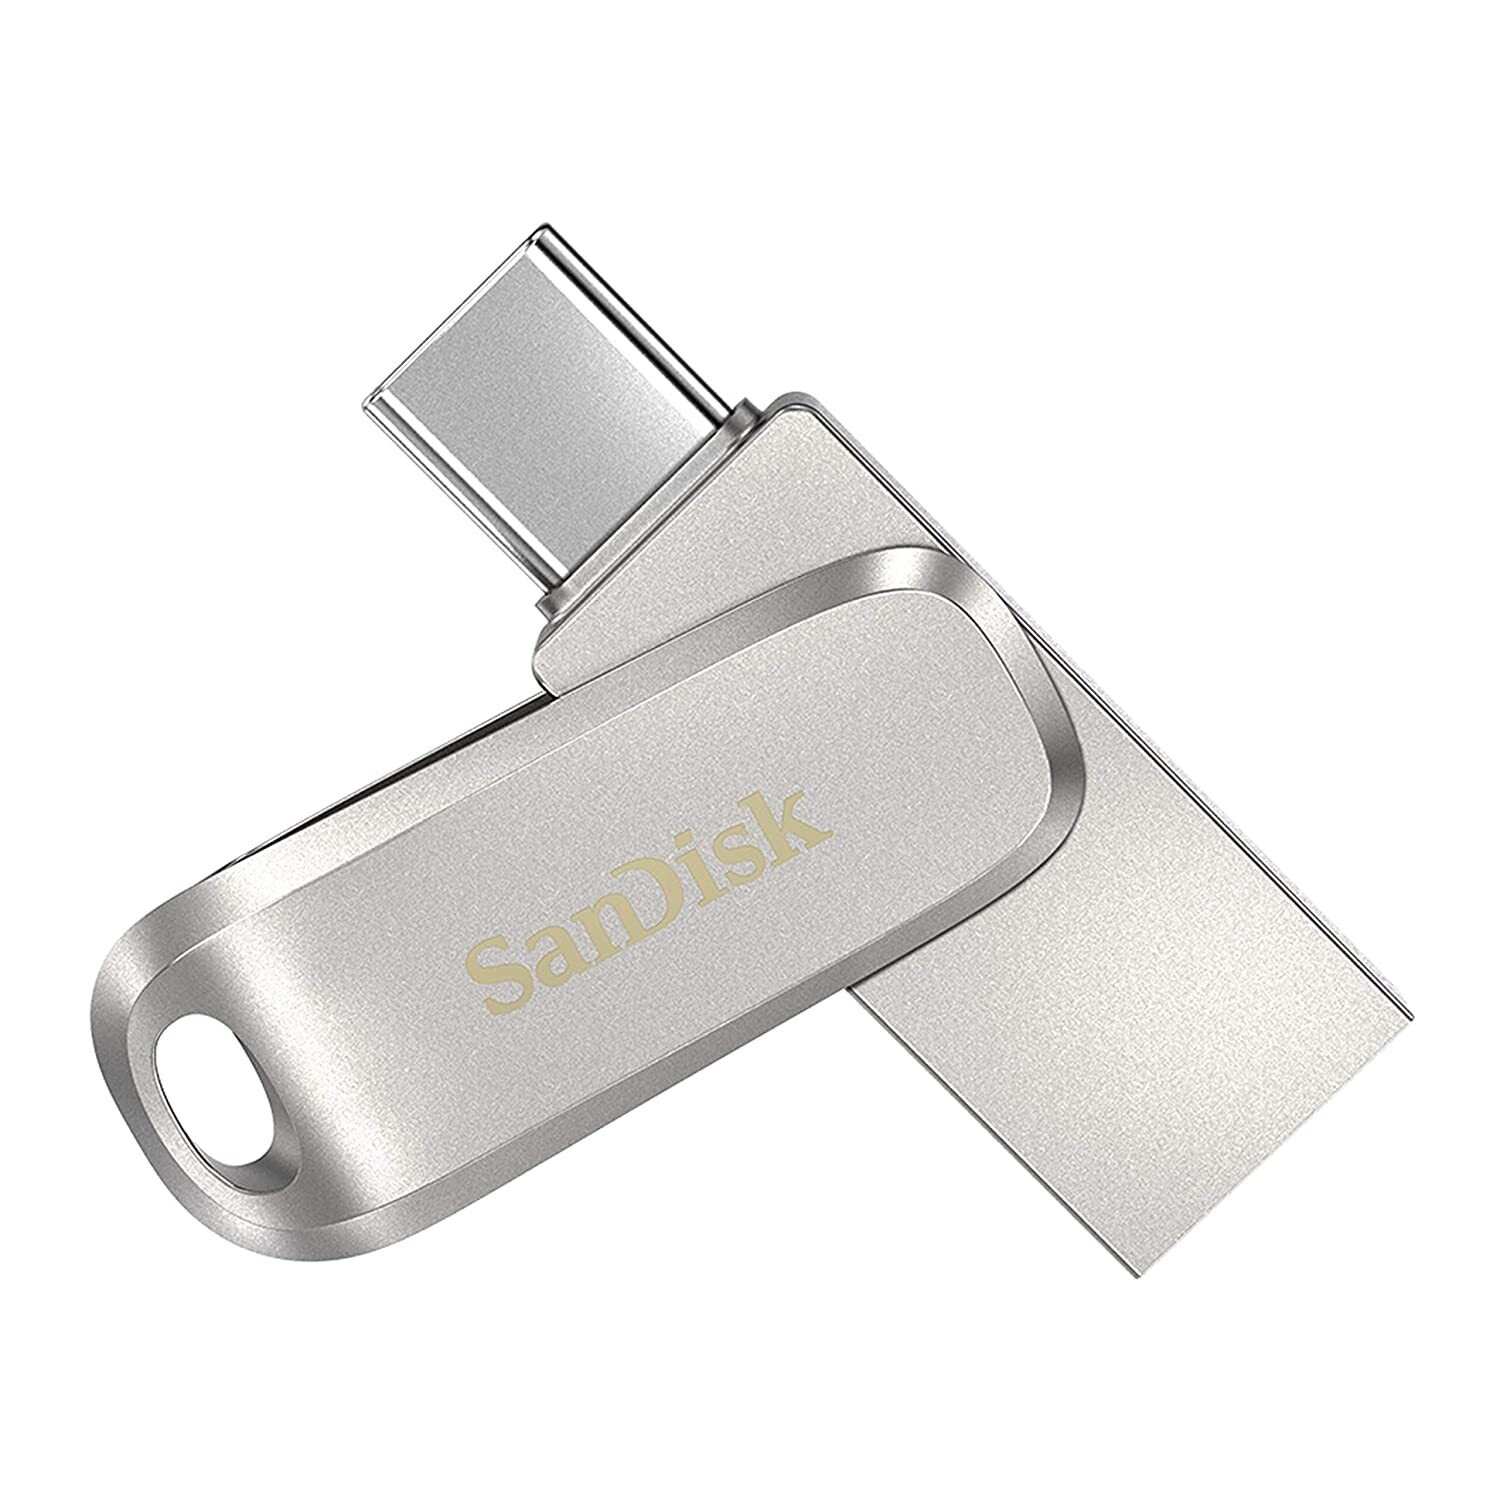 SanDisk 32GB Dual Drive Luxe USB Type-C Pen Drive for mobile